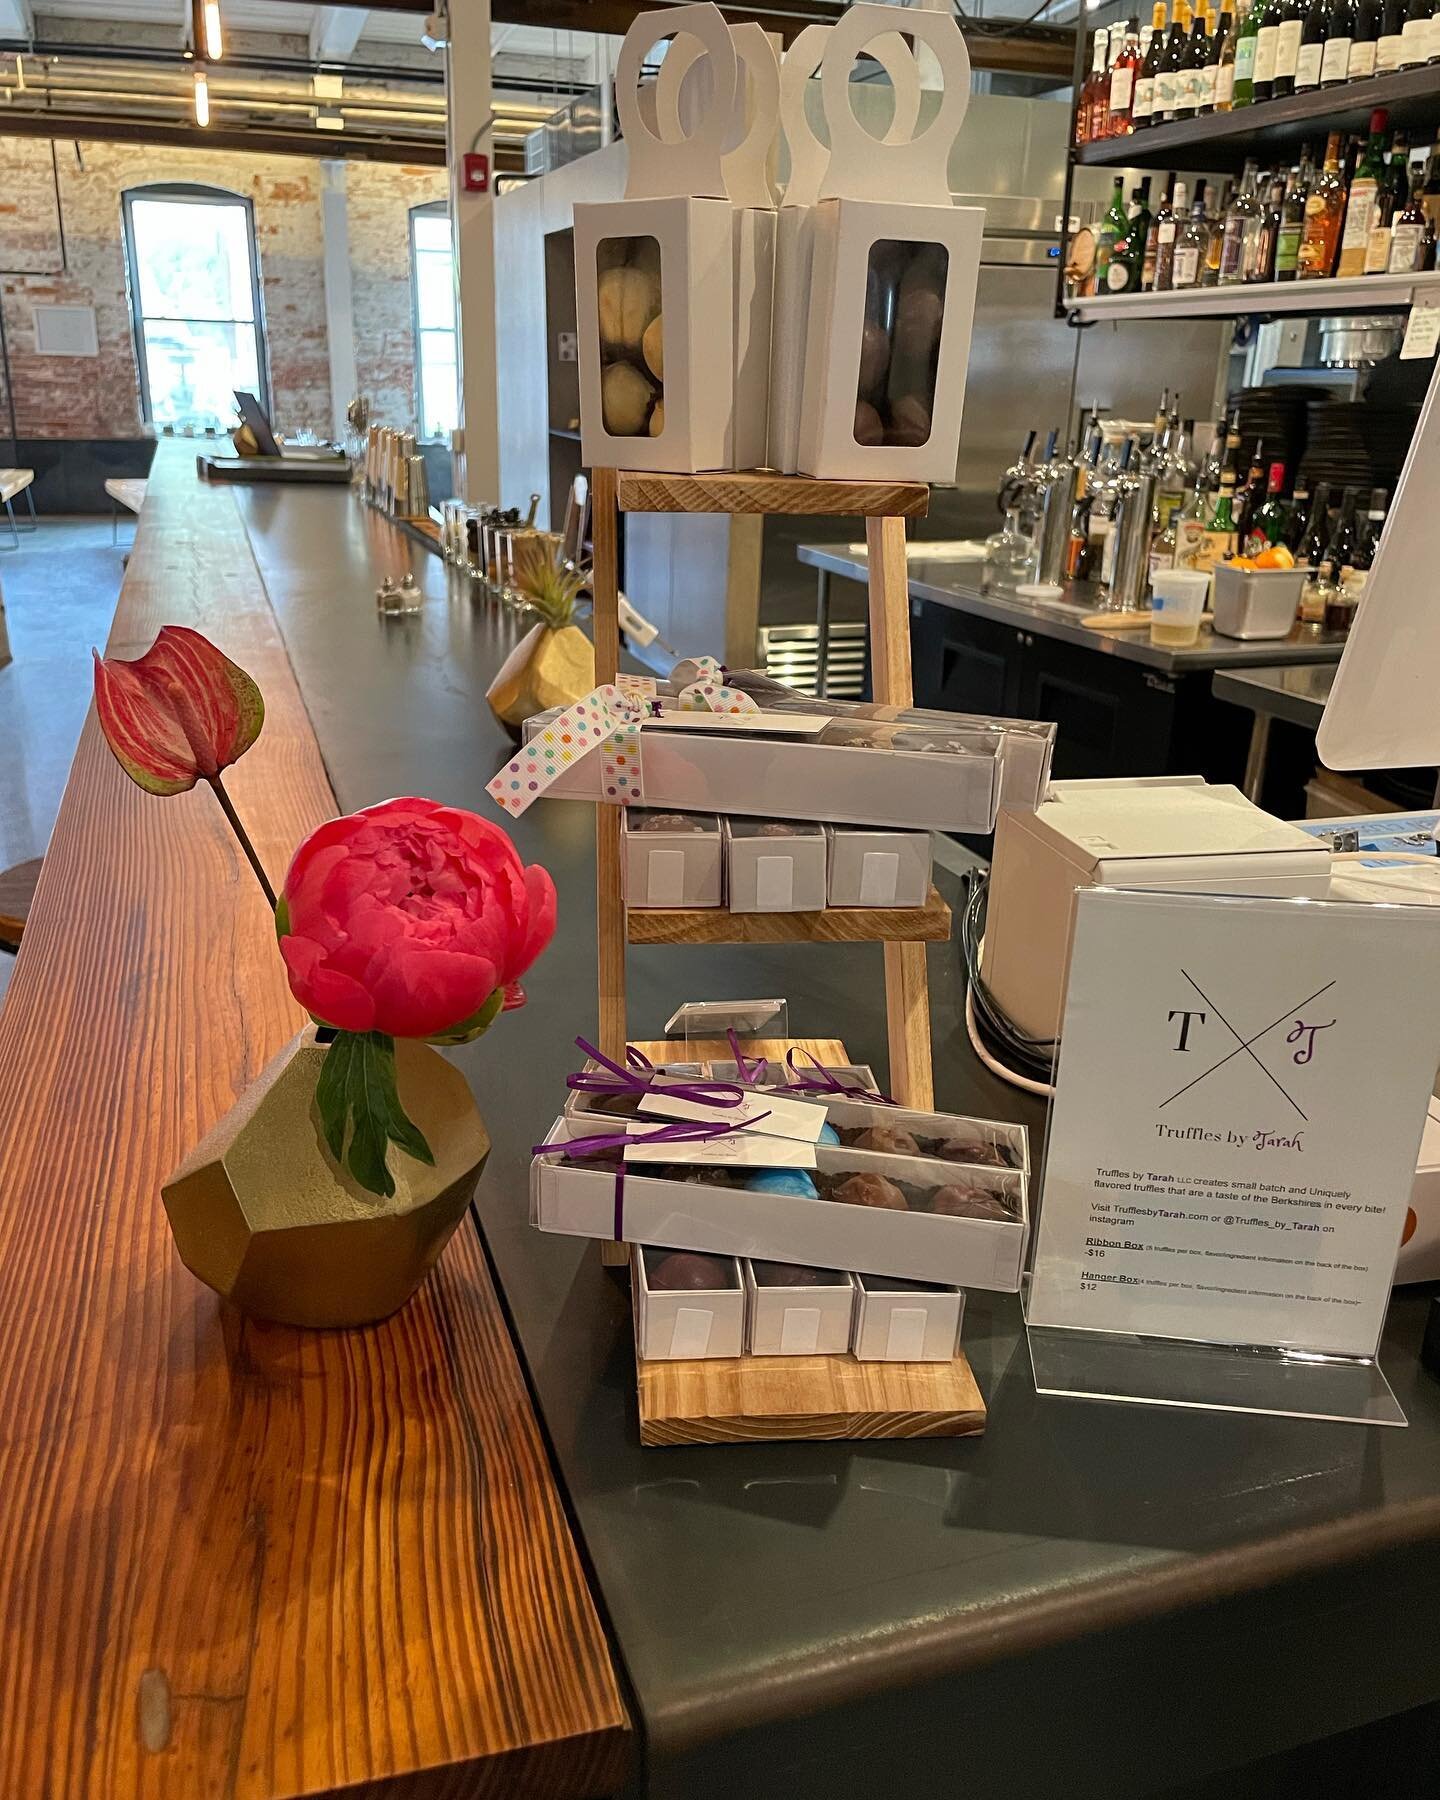 #mothersday is right around the corner! Looking for the perfect #mothersdaygift ? @truffles_by_tarah has the best #chocolatetruffles that mom is sure to love!!! Stop by @thebreakroomgw for dinner and grab some truffles for mom! Or visit @greylockwork